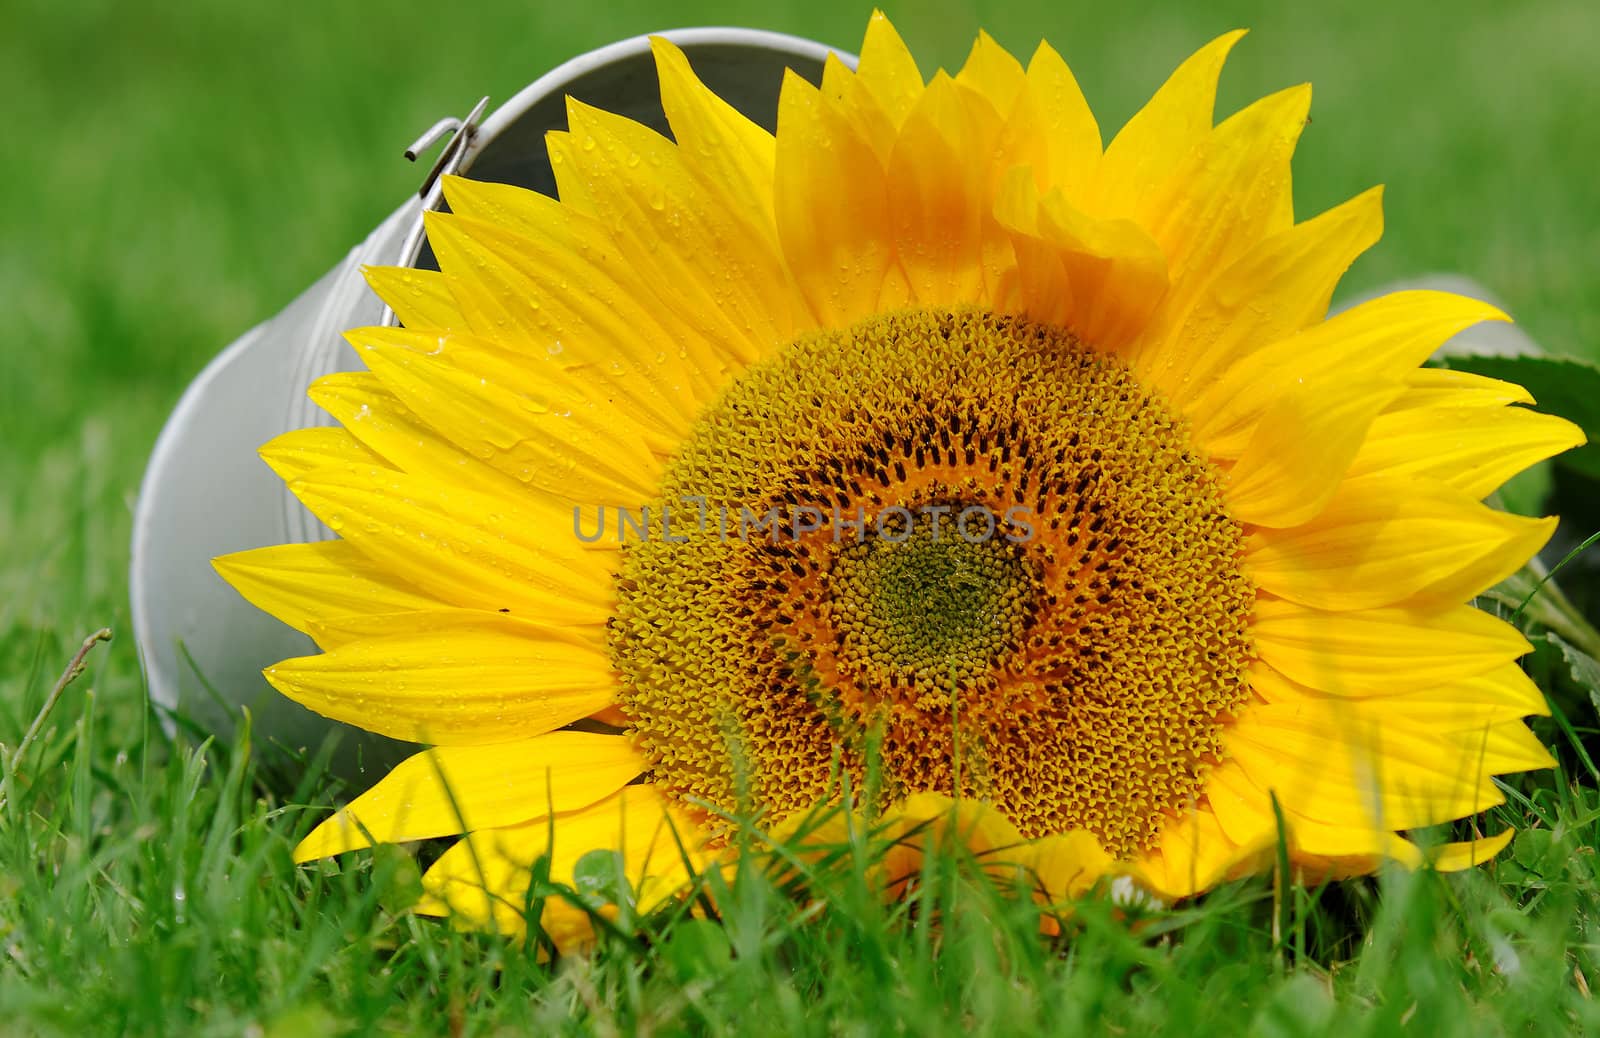 a sunflower and a bucket lying in the grass